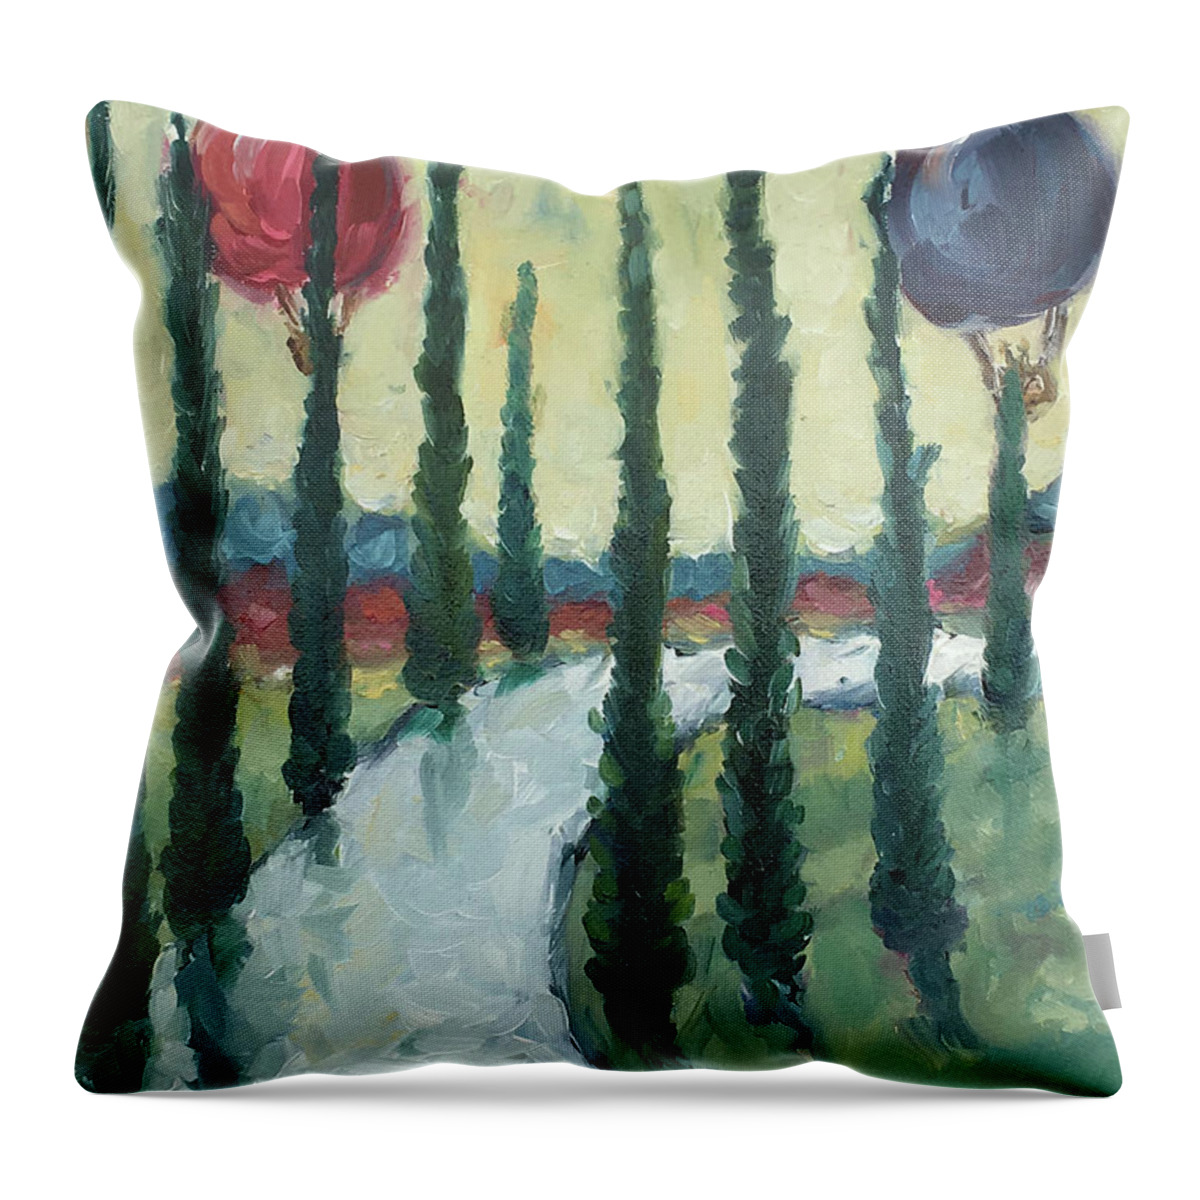 Wine Country Throw Pillow featuring the painting Wine Country Balloons by Roxy Rich